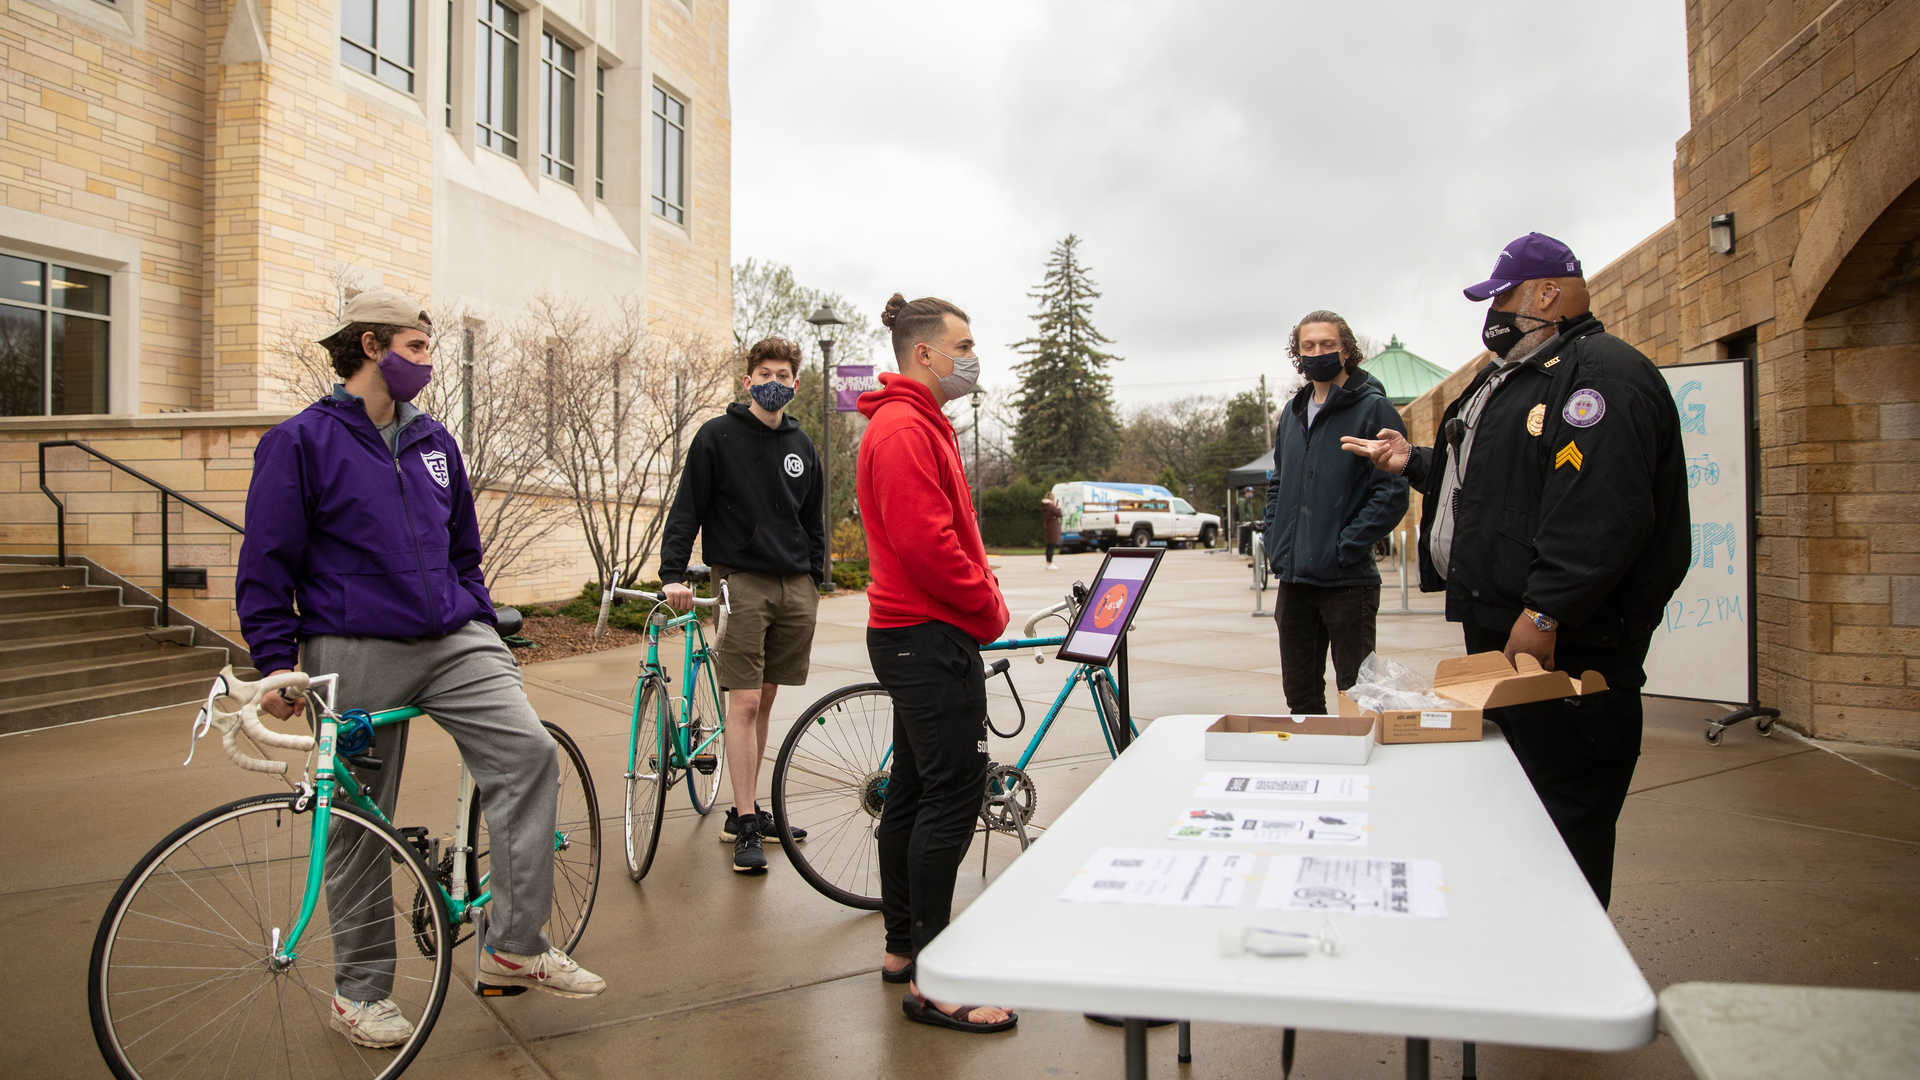 Public Safety staff interacting with students on bicycles